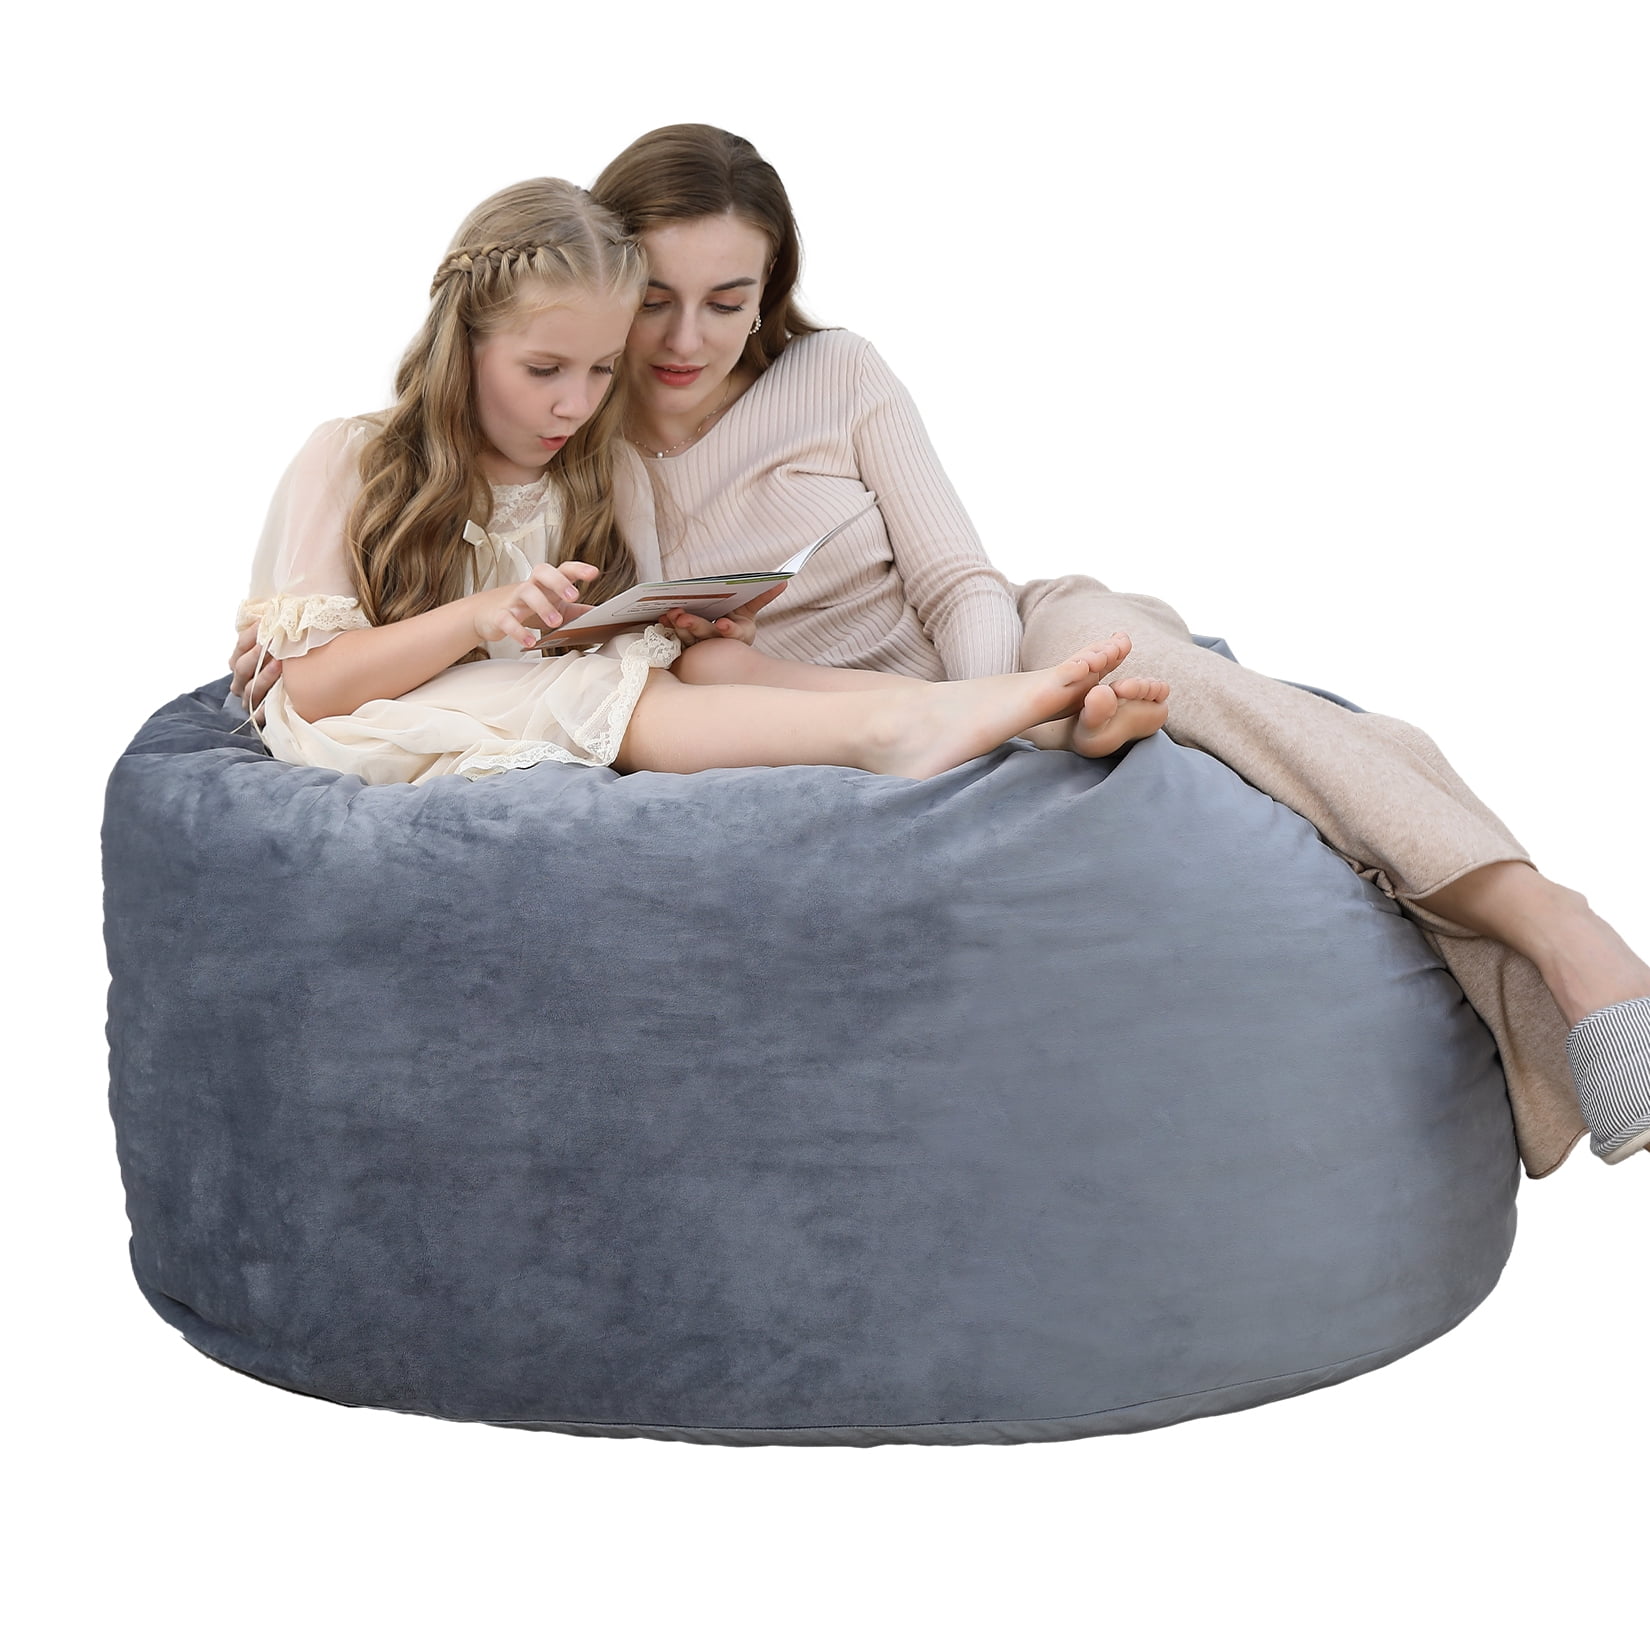 WhatsBedding Giant Bean Bag Chairs for Adults 4 ft with Removable Washble  Cover,Stuffed Memory Foam Bean Bags with Filler Included,Soft Velvet Bean